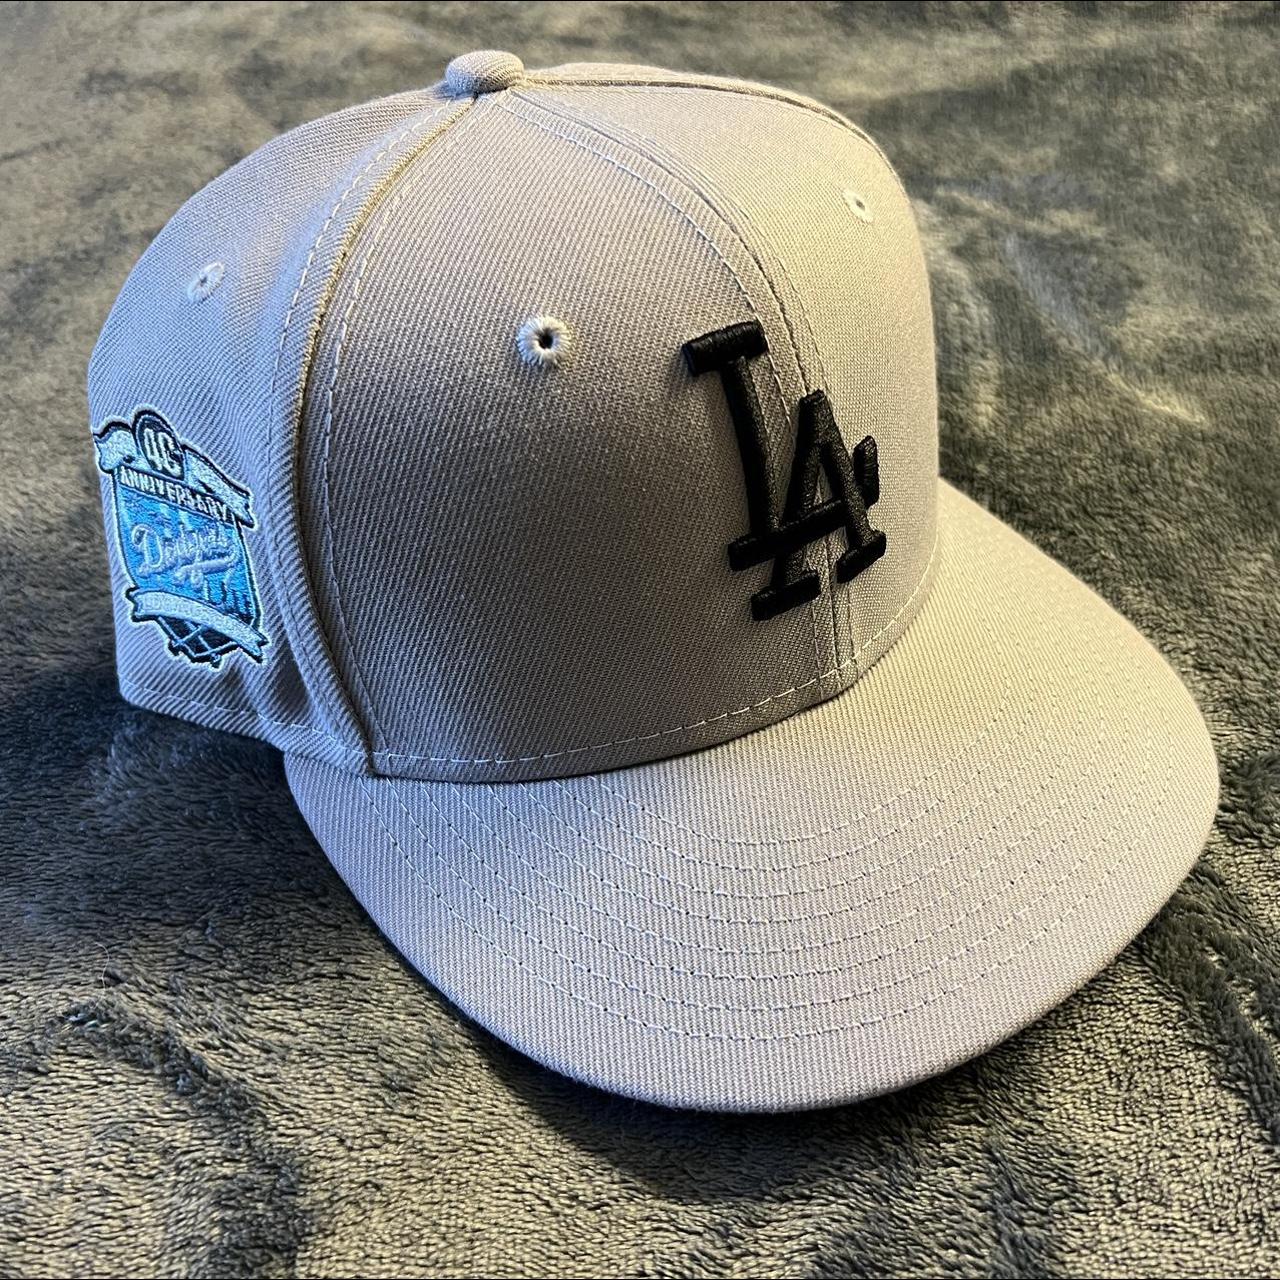 Los Angeles Dodgers New Era 59FIFTY Fitted Hat - Light Blue